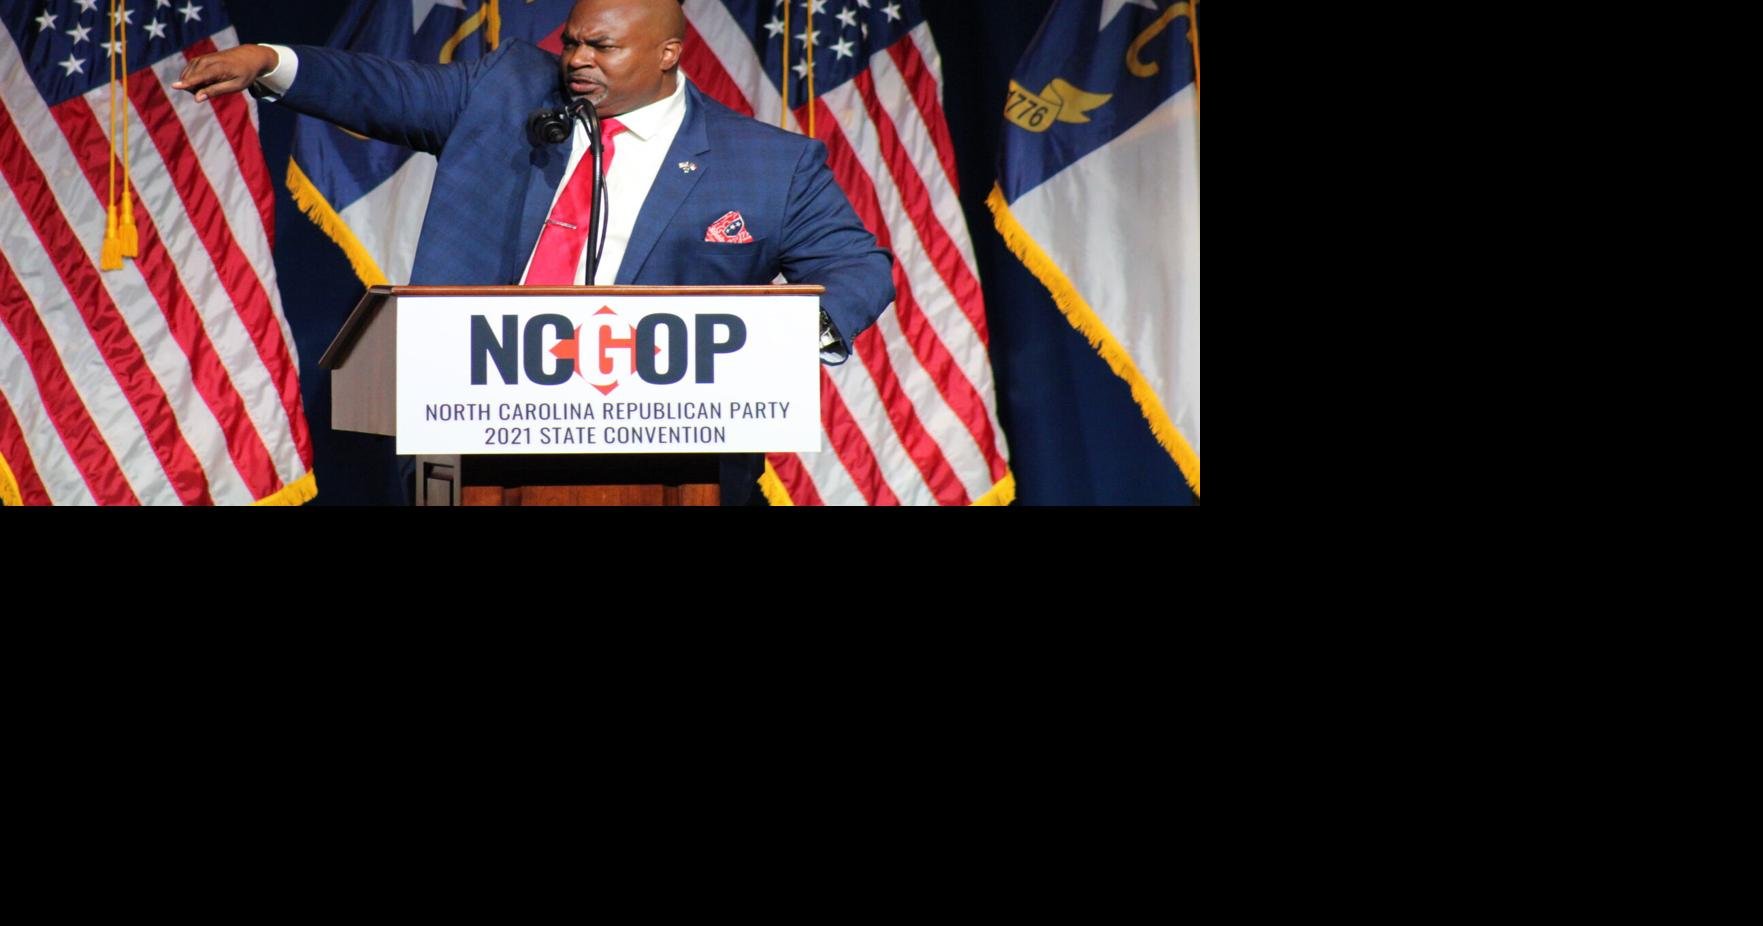 Republican leaders speak at NCGOP State Convention The East